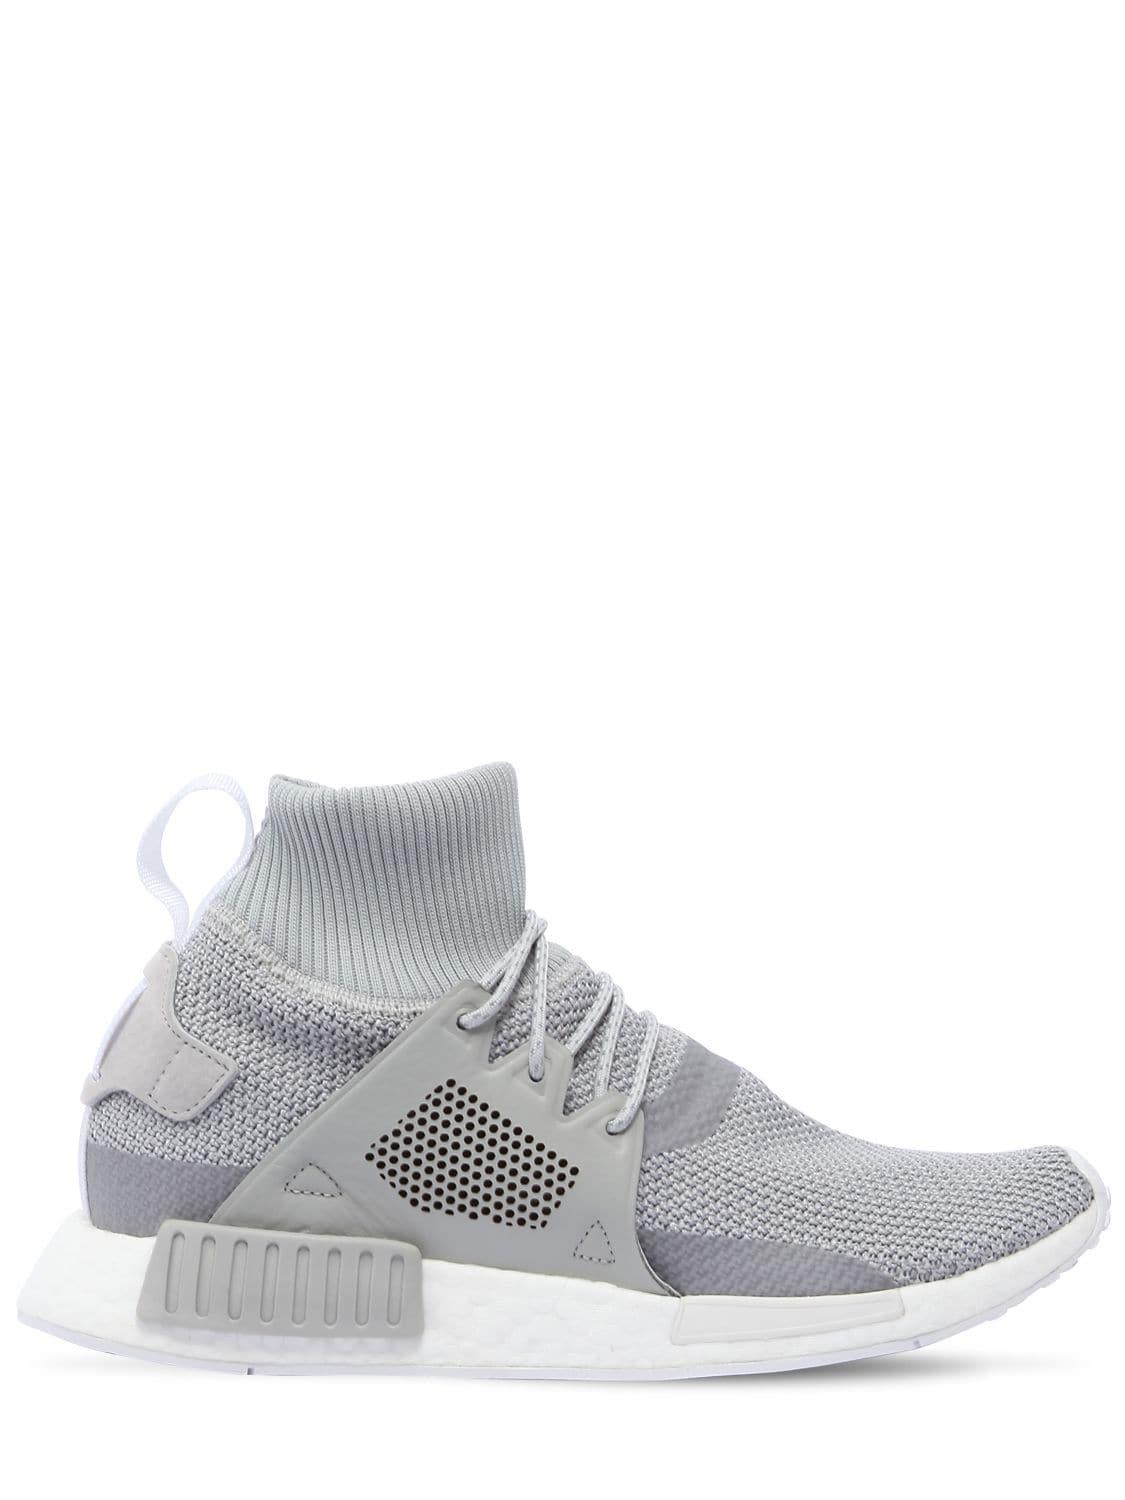 adidas Originals Leather Nmd Xr1 Winter Trainers Light Grey (Gray) for - Lyst